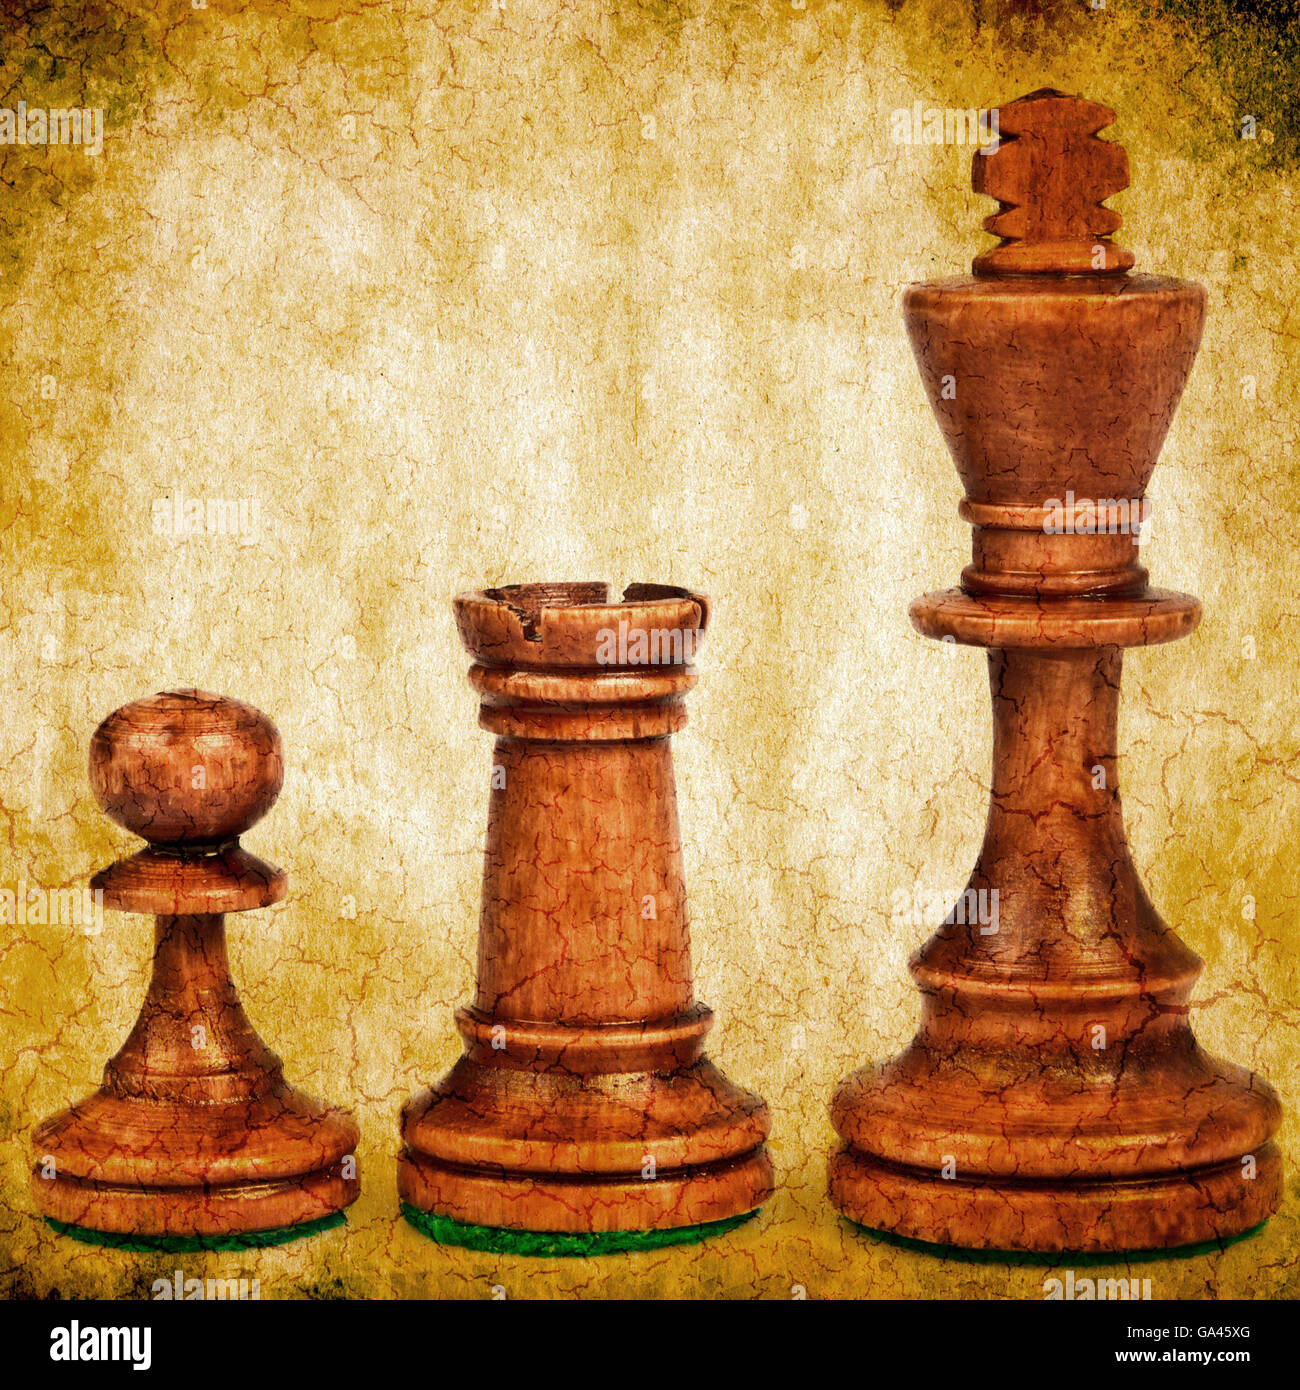 chess king pawn and rook with grunge effect Stock Photo